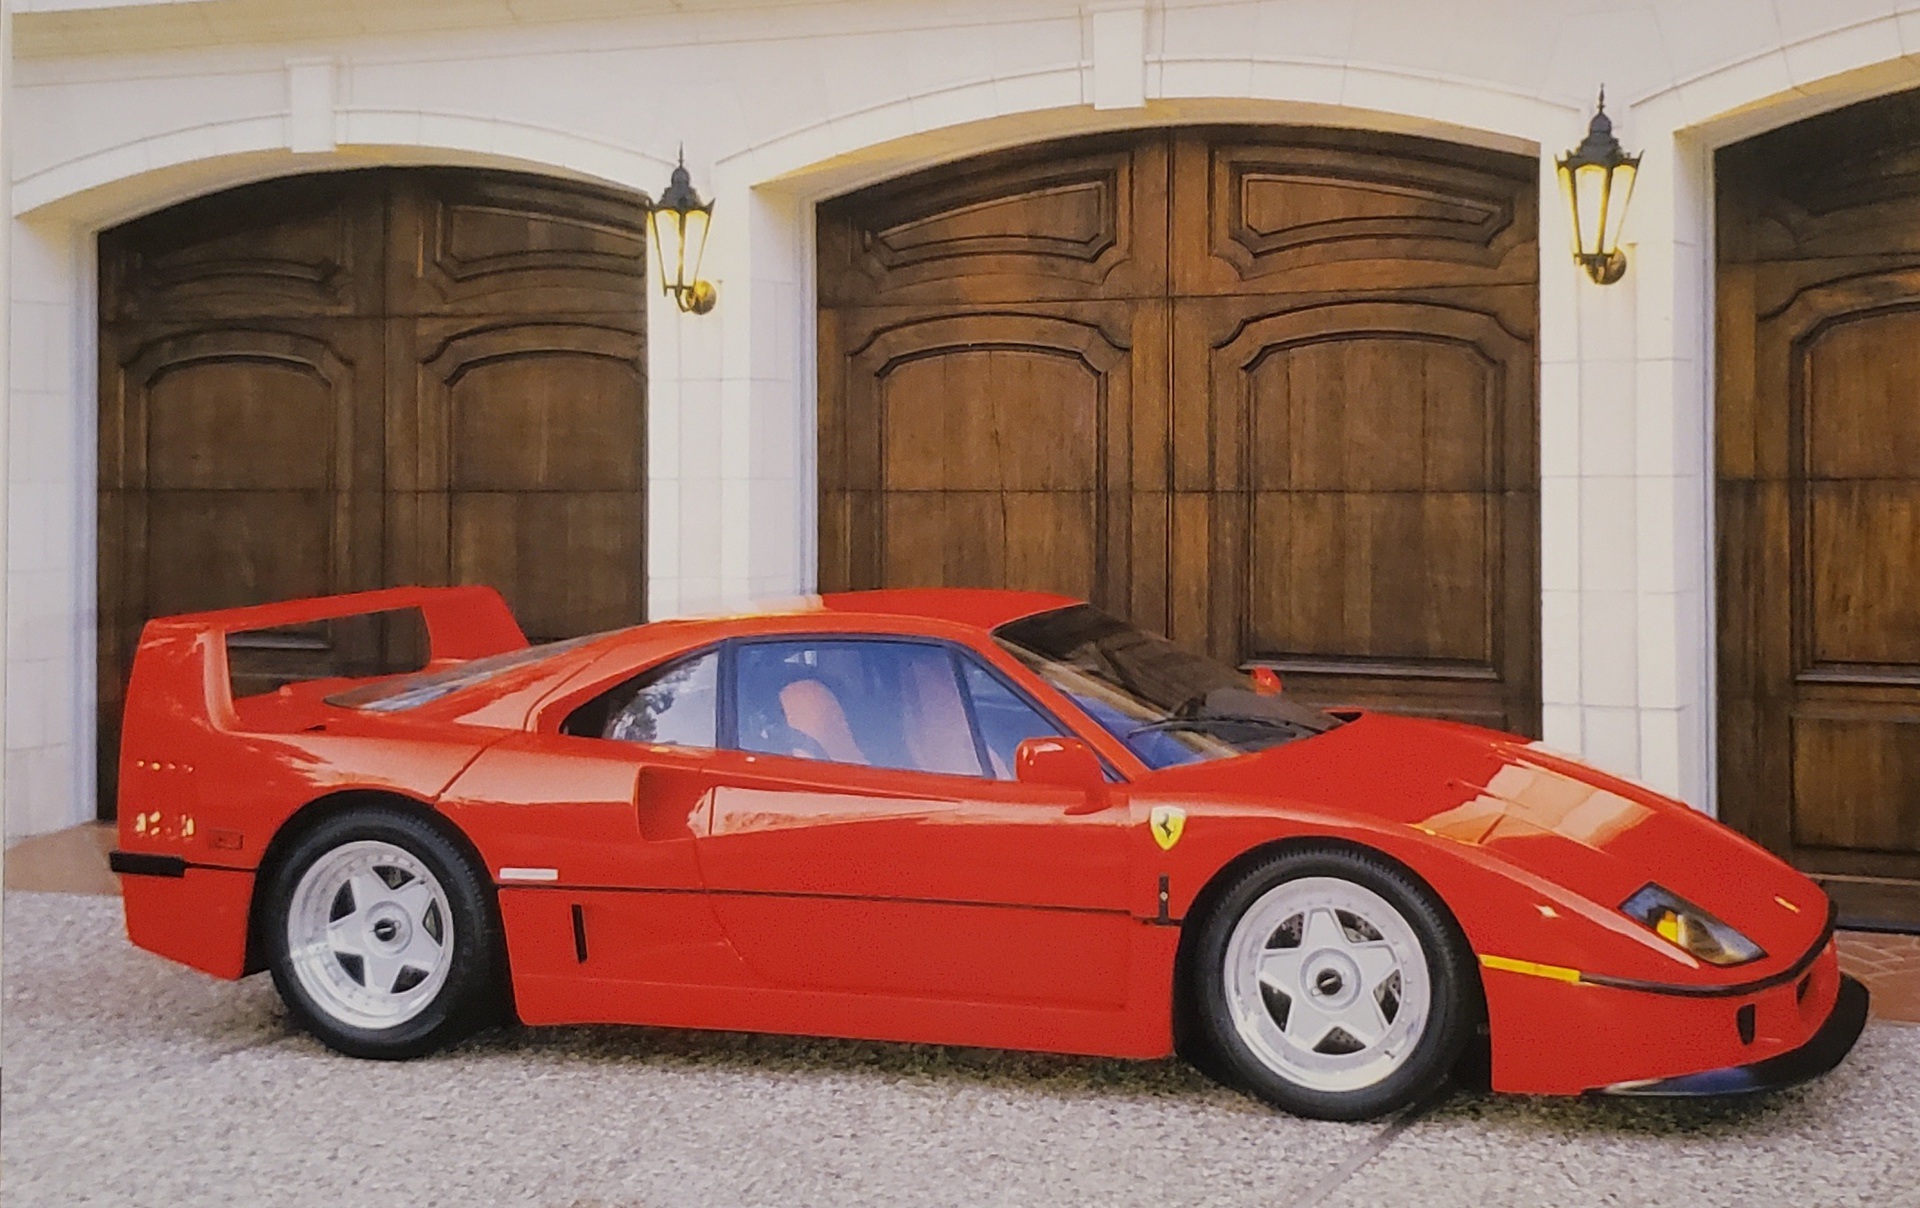 Red Ferrari F40 parked outside manor house